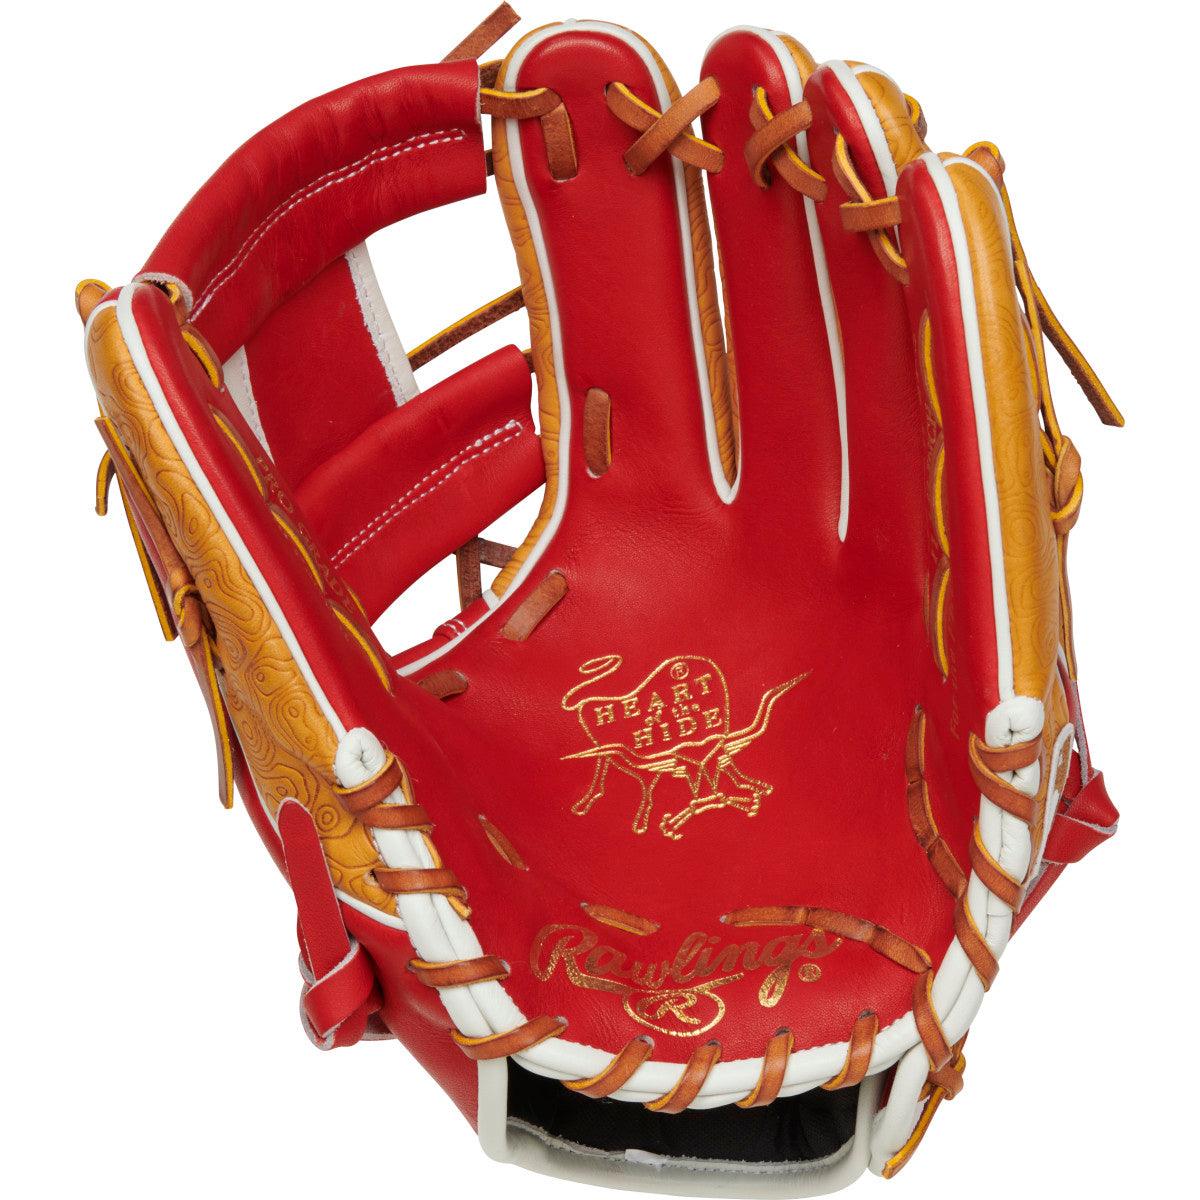 2023 Rawlings Heart of the Hide 11.5